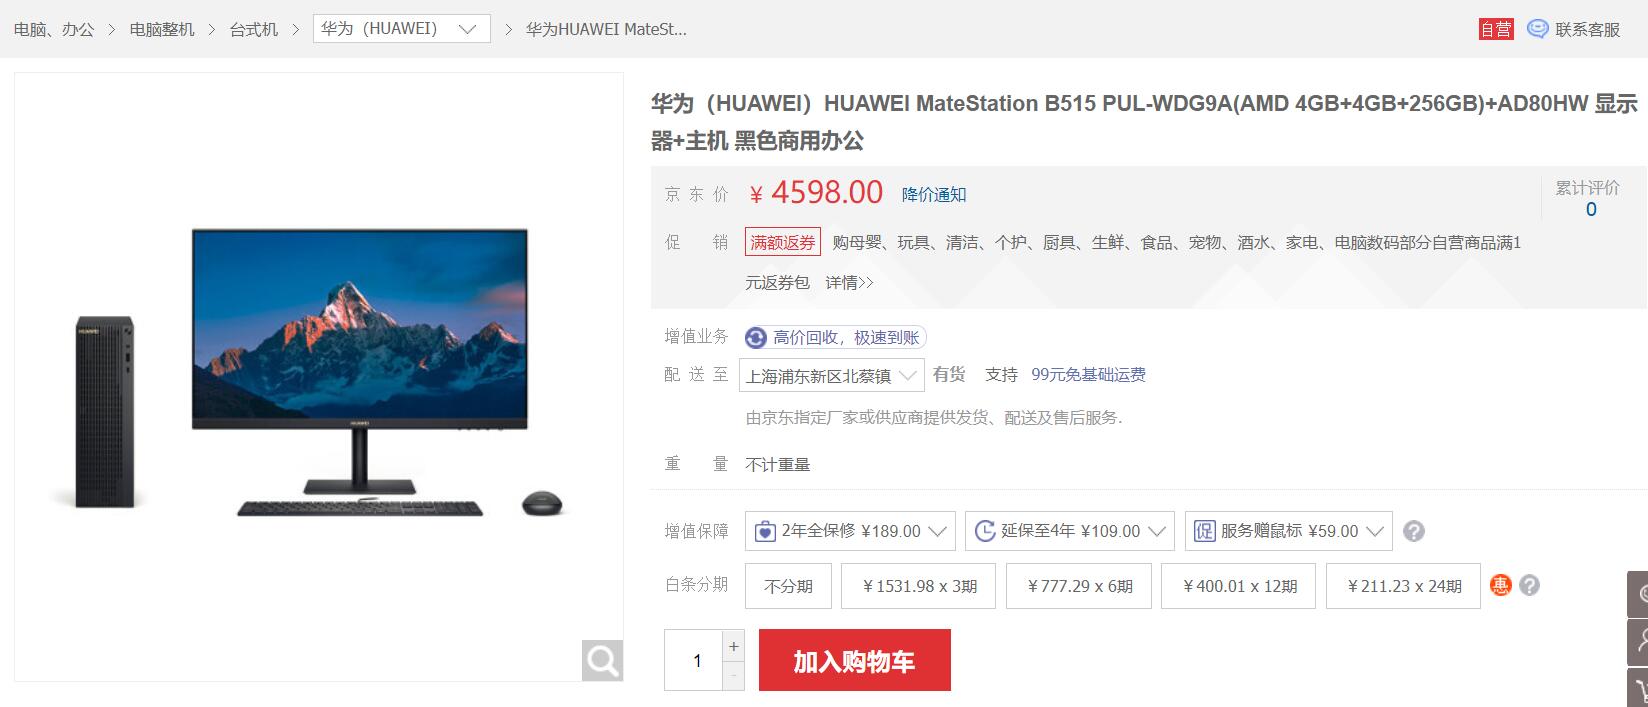 Huawei's desktop computer, the MateStation B515, is now available at JD.com-cnTechPost